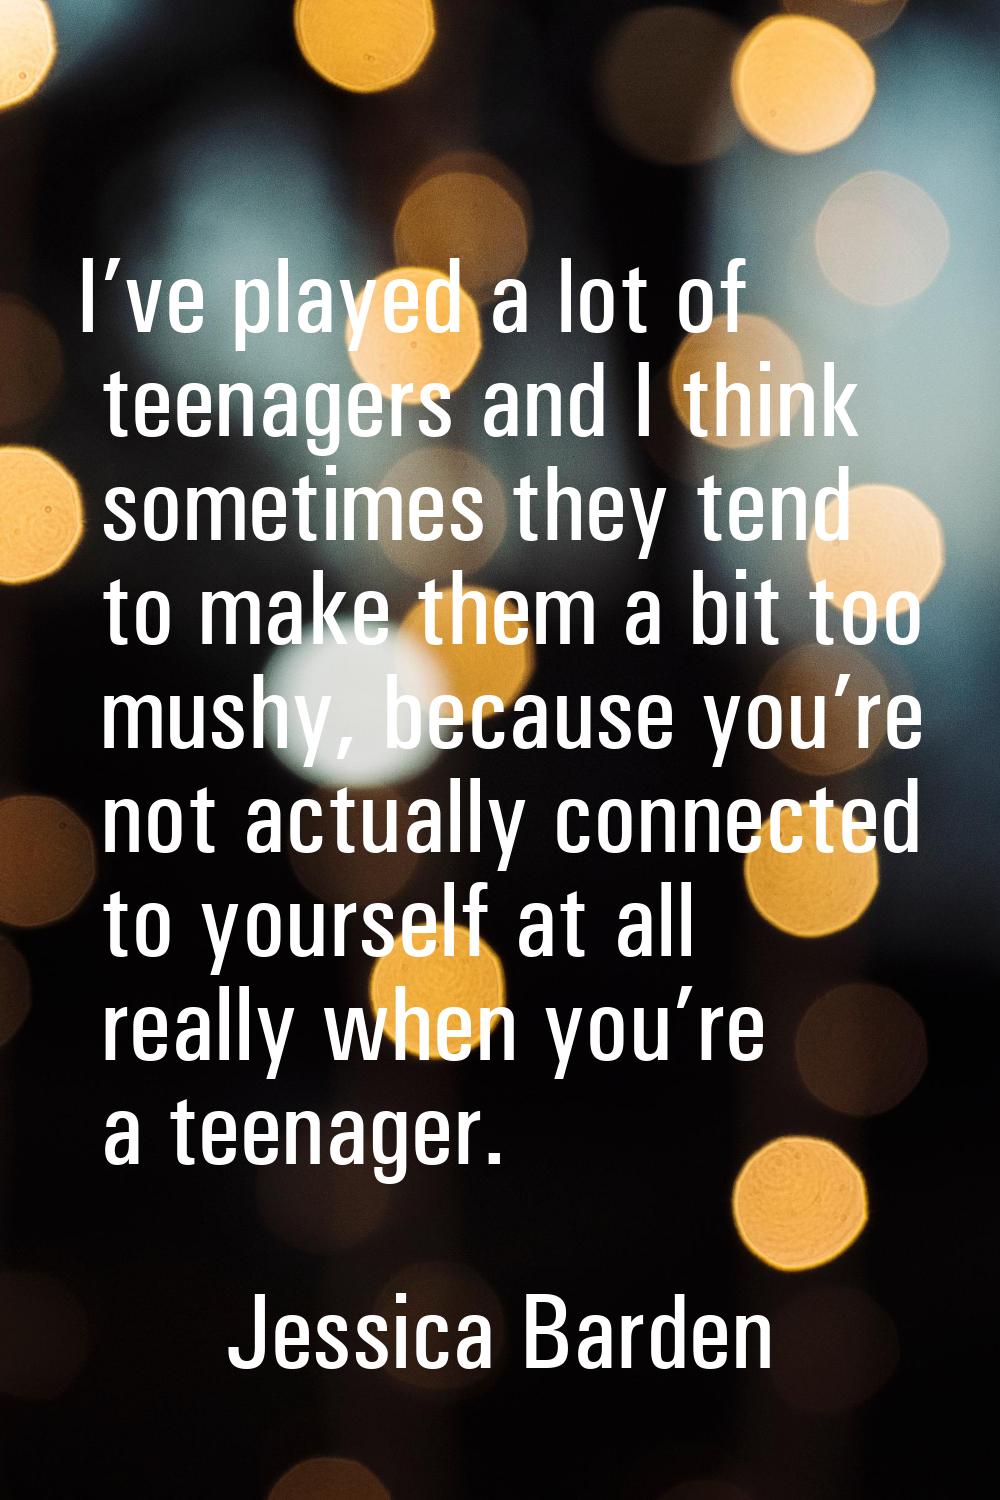 I’ve played a lot of teenagers and I think sometimes they tend to make them a bit too mushy, becaus